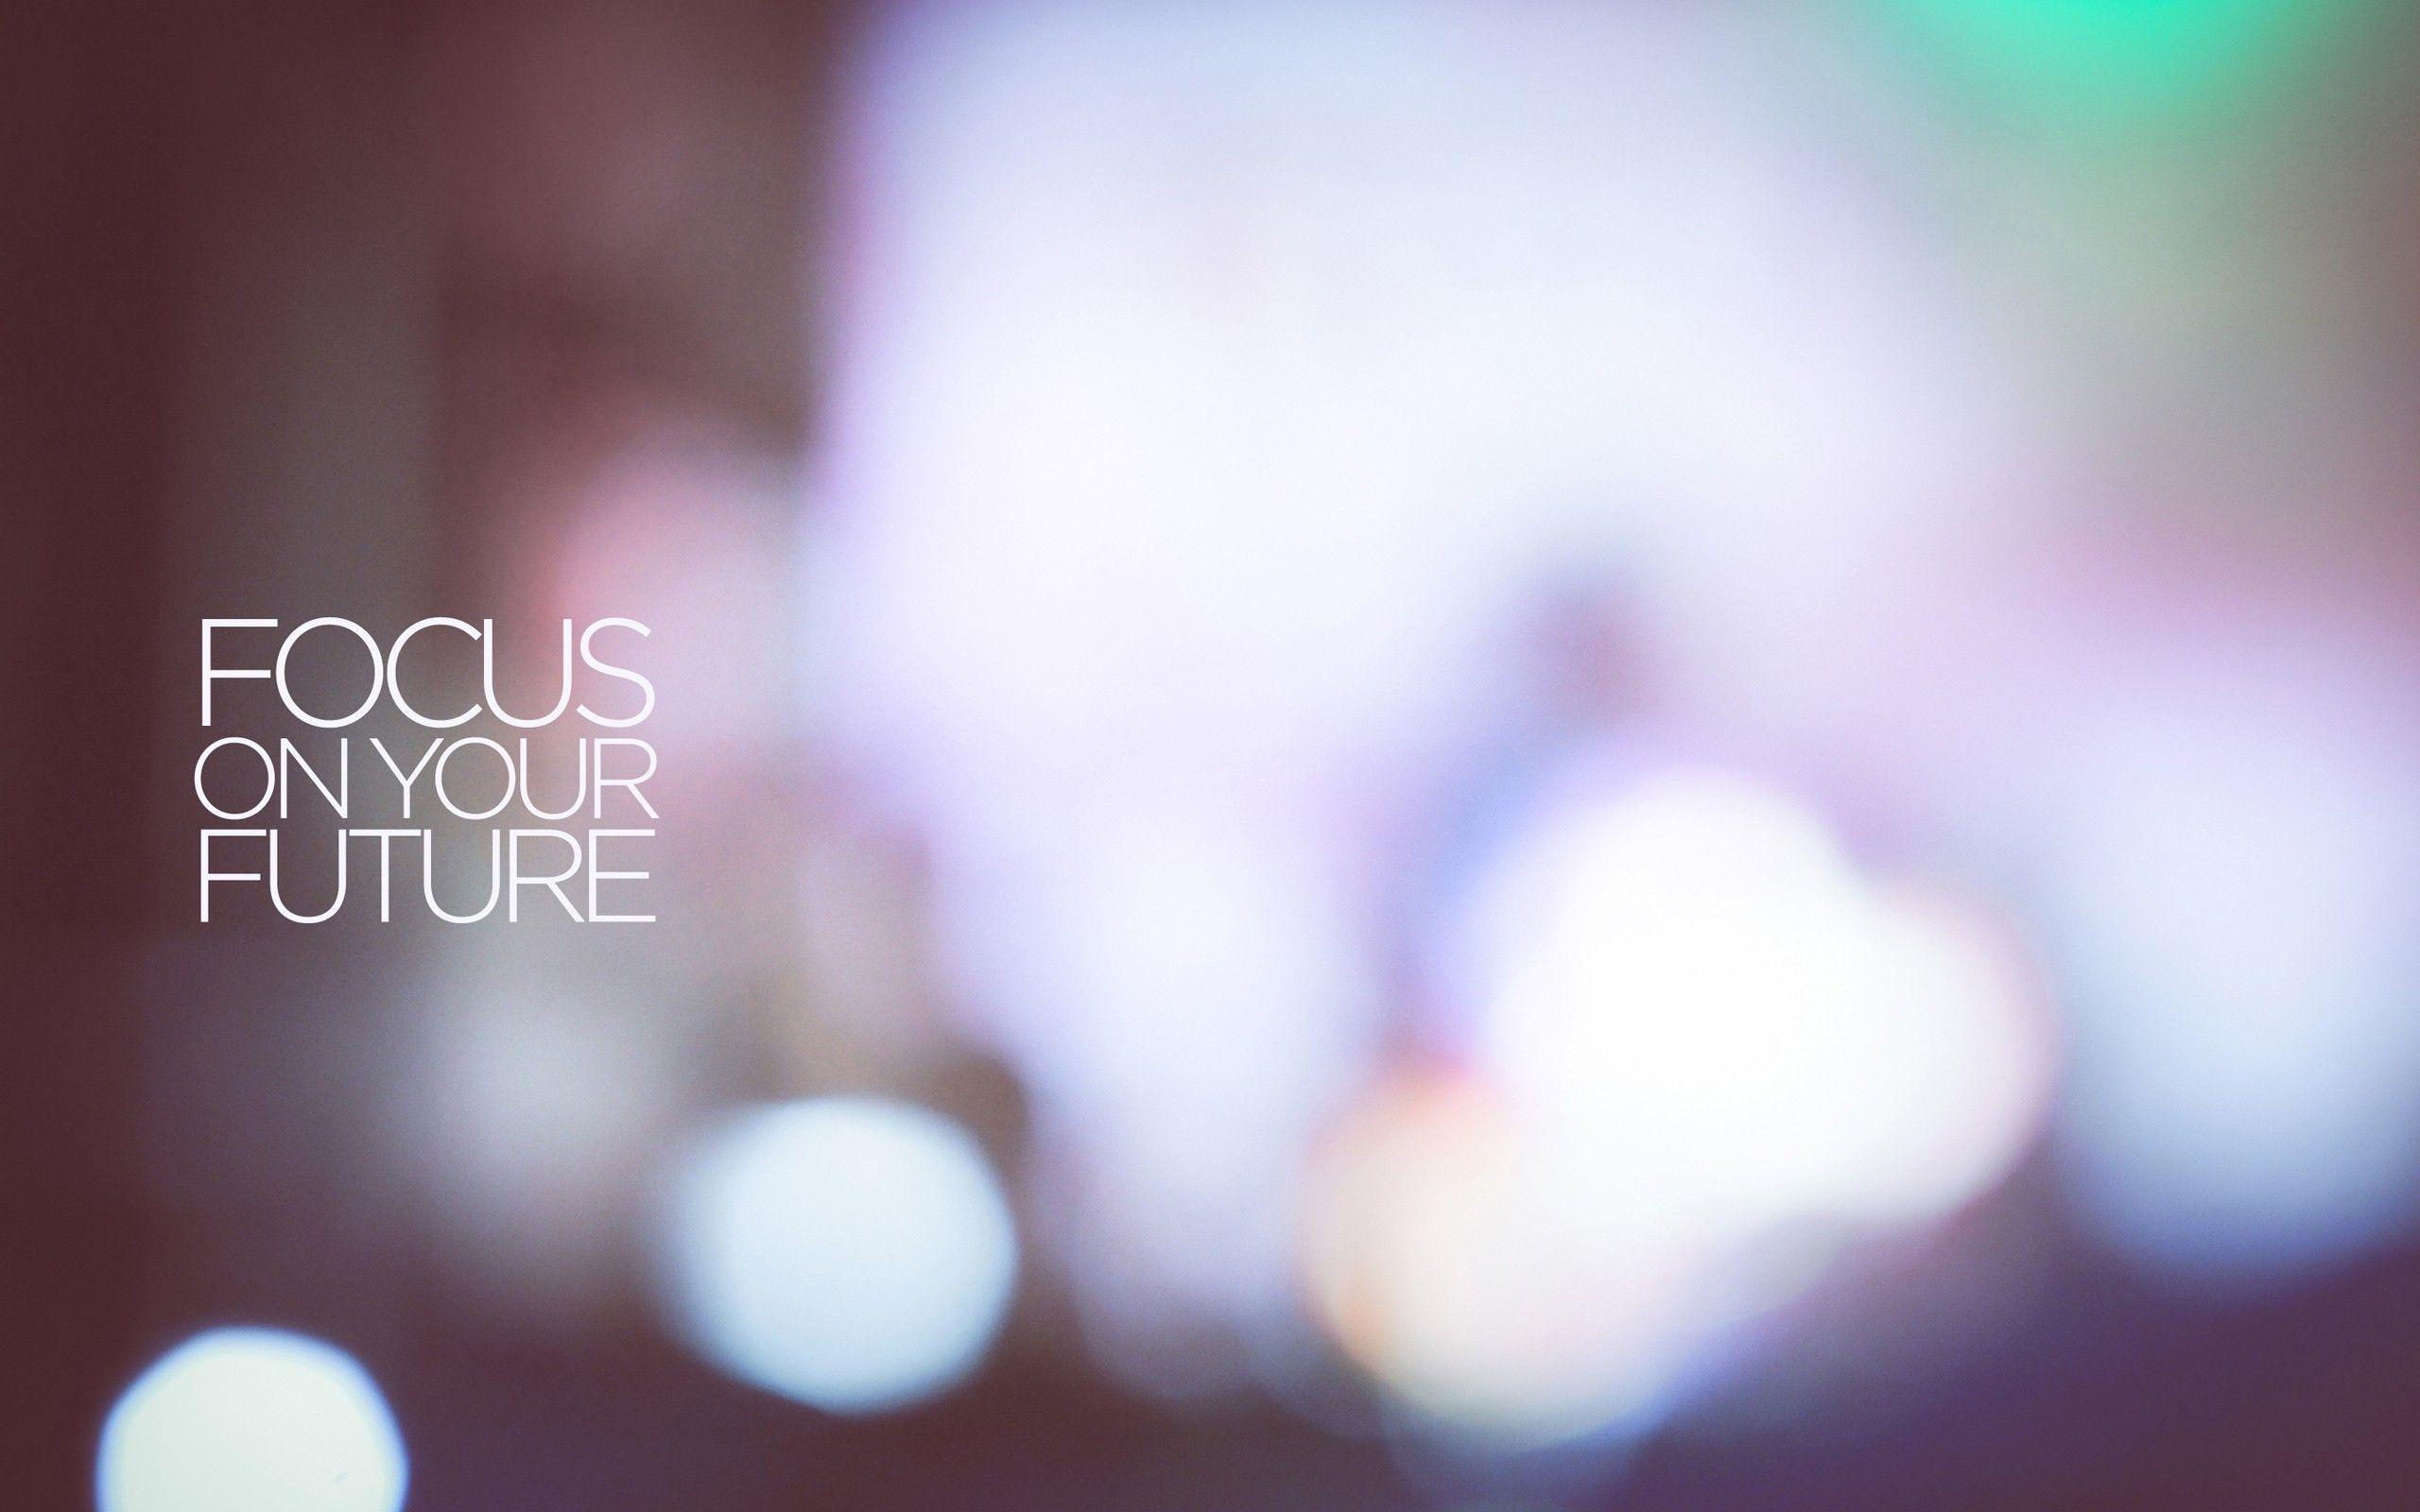 Focus on your future Wallpaper